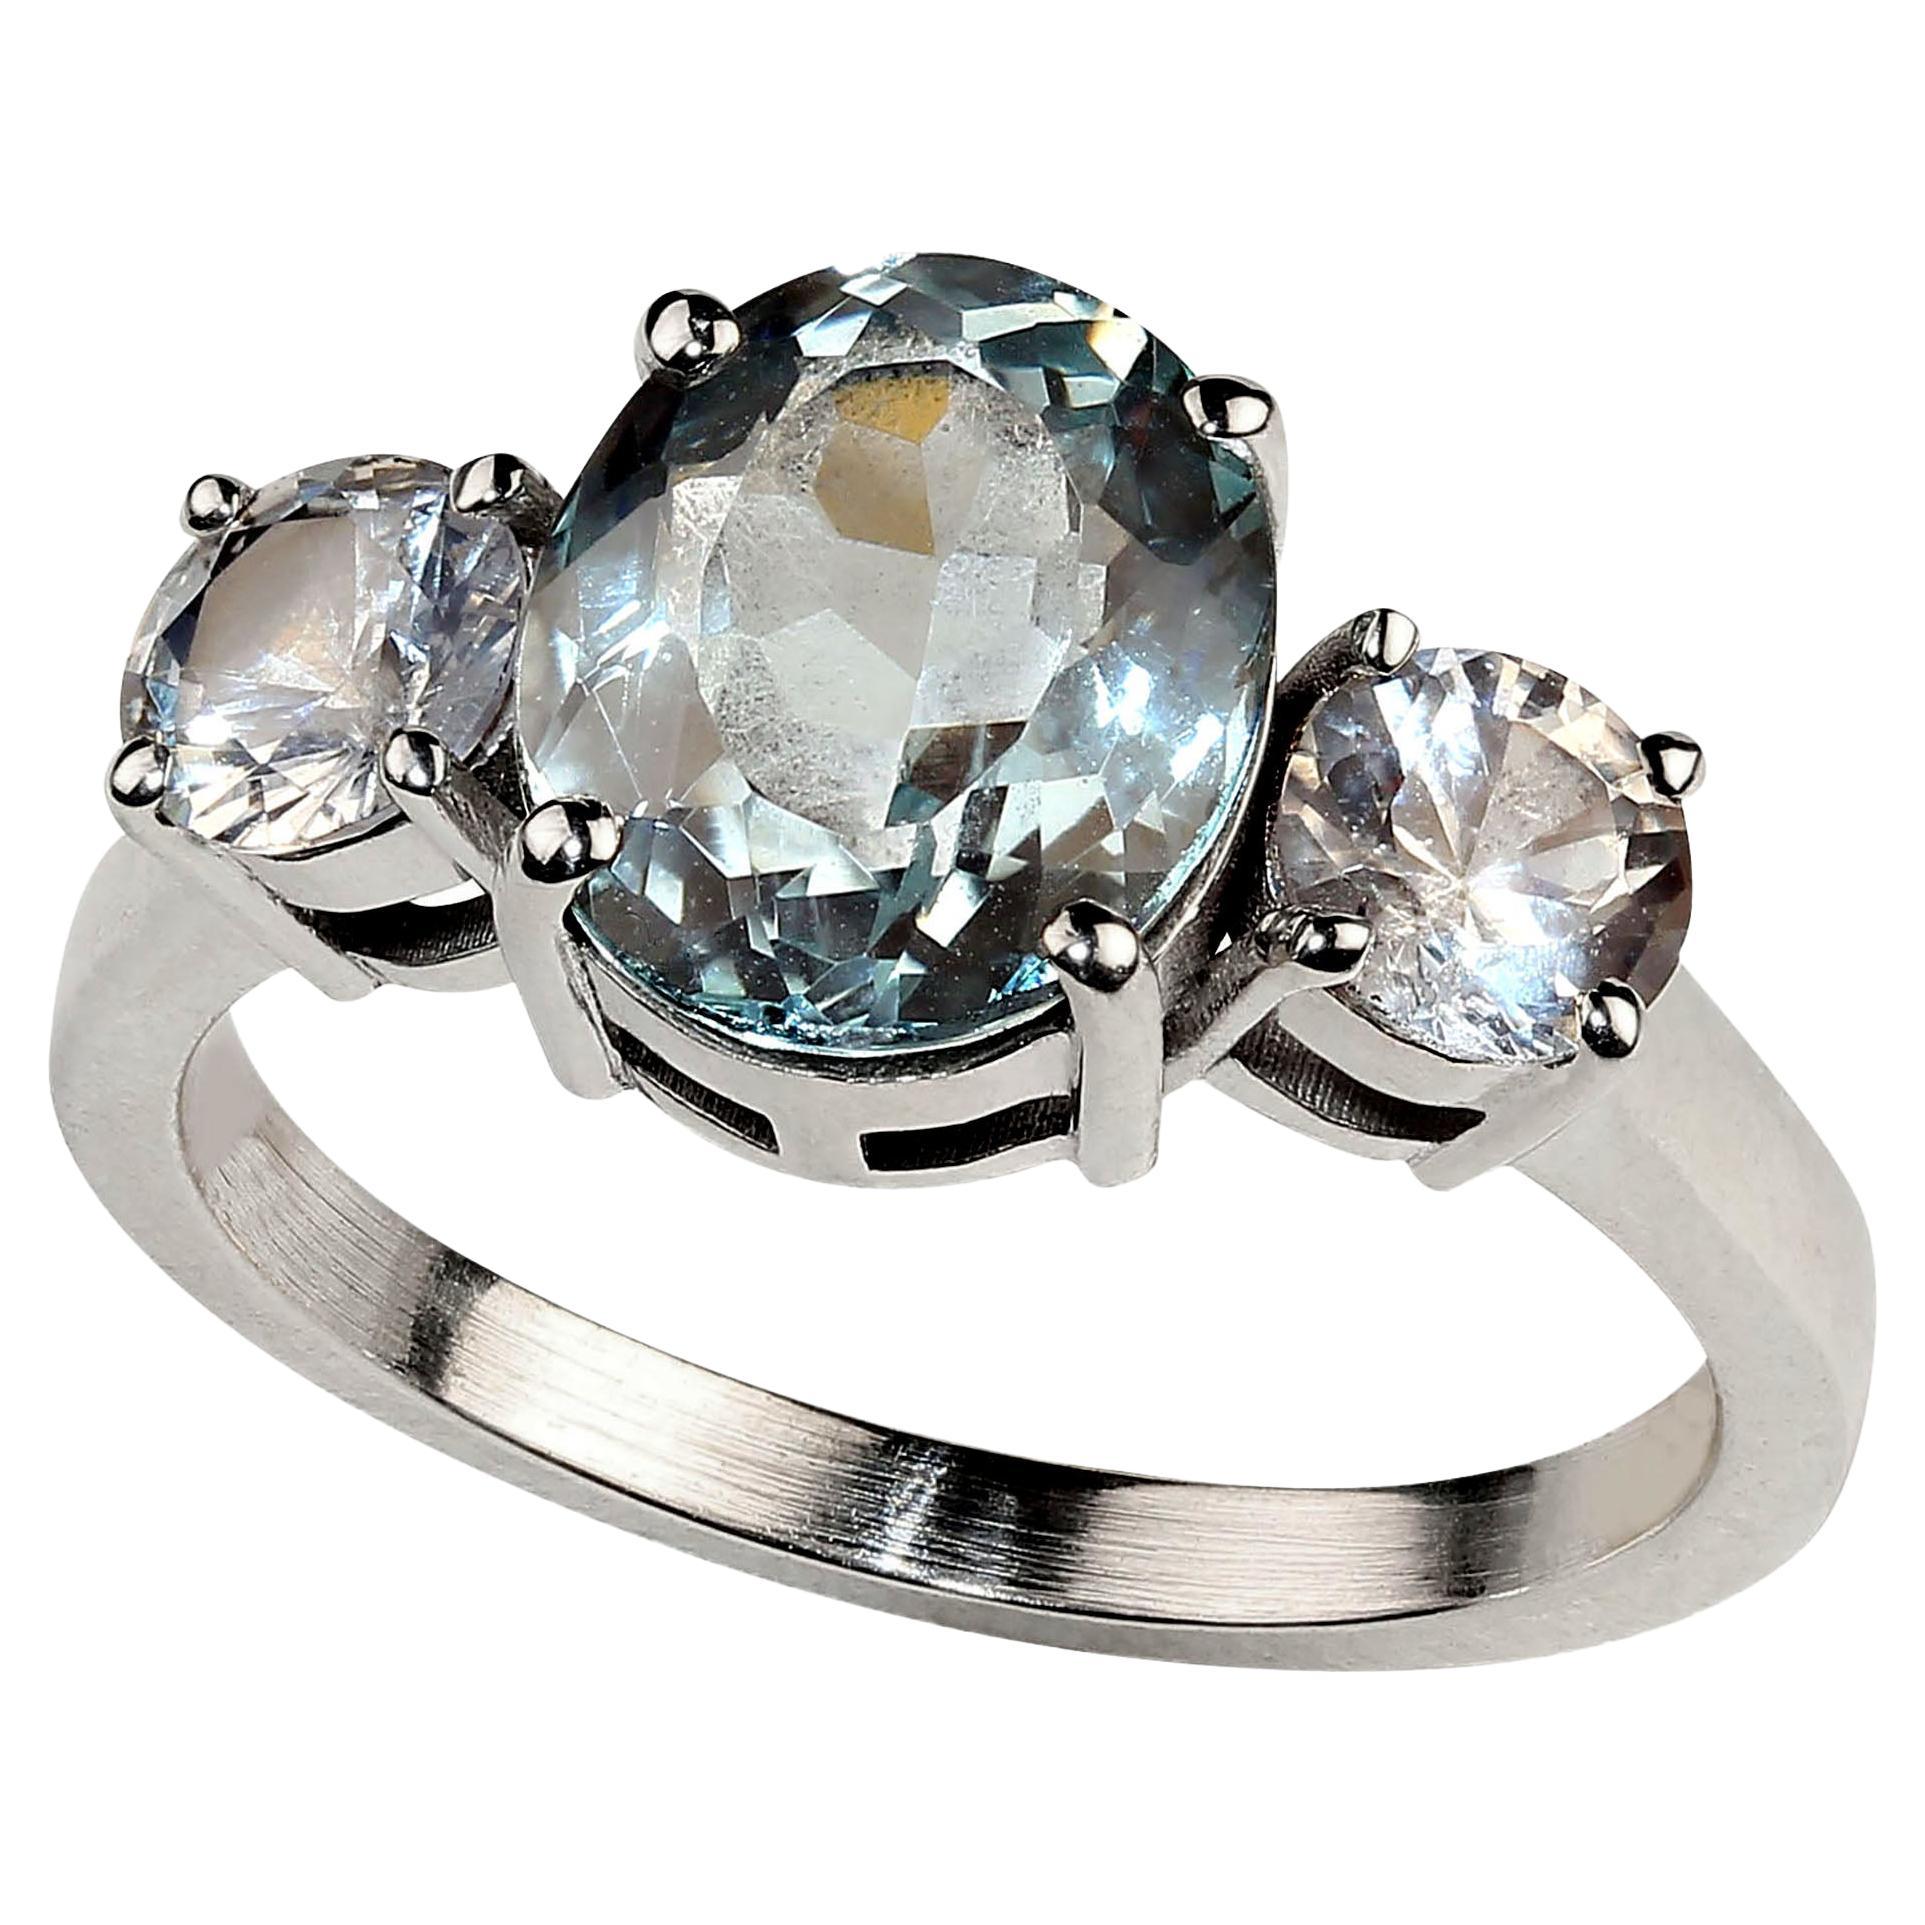 Lovely 3ct. oval Aquamarine accented with 2 sparkling white Sapphires set in Sterling Silver. The white Sapphires are 0.82cts. This classic design is perfect for all occasions. Legend says that Neptune, the King of the Sea, gave Aquamarine as gifts